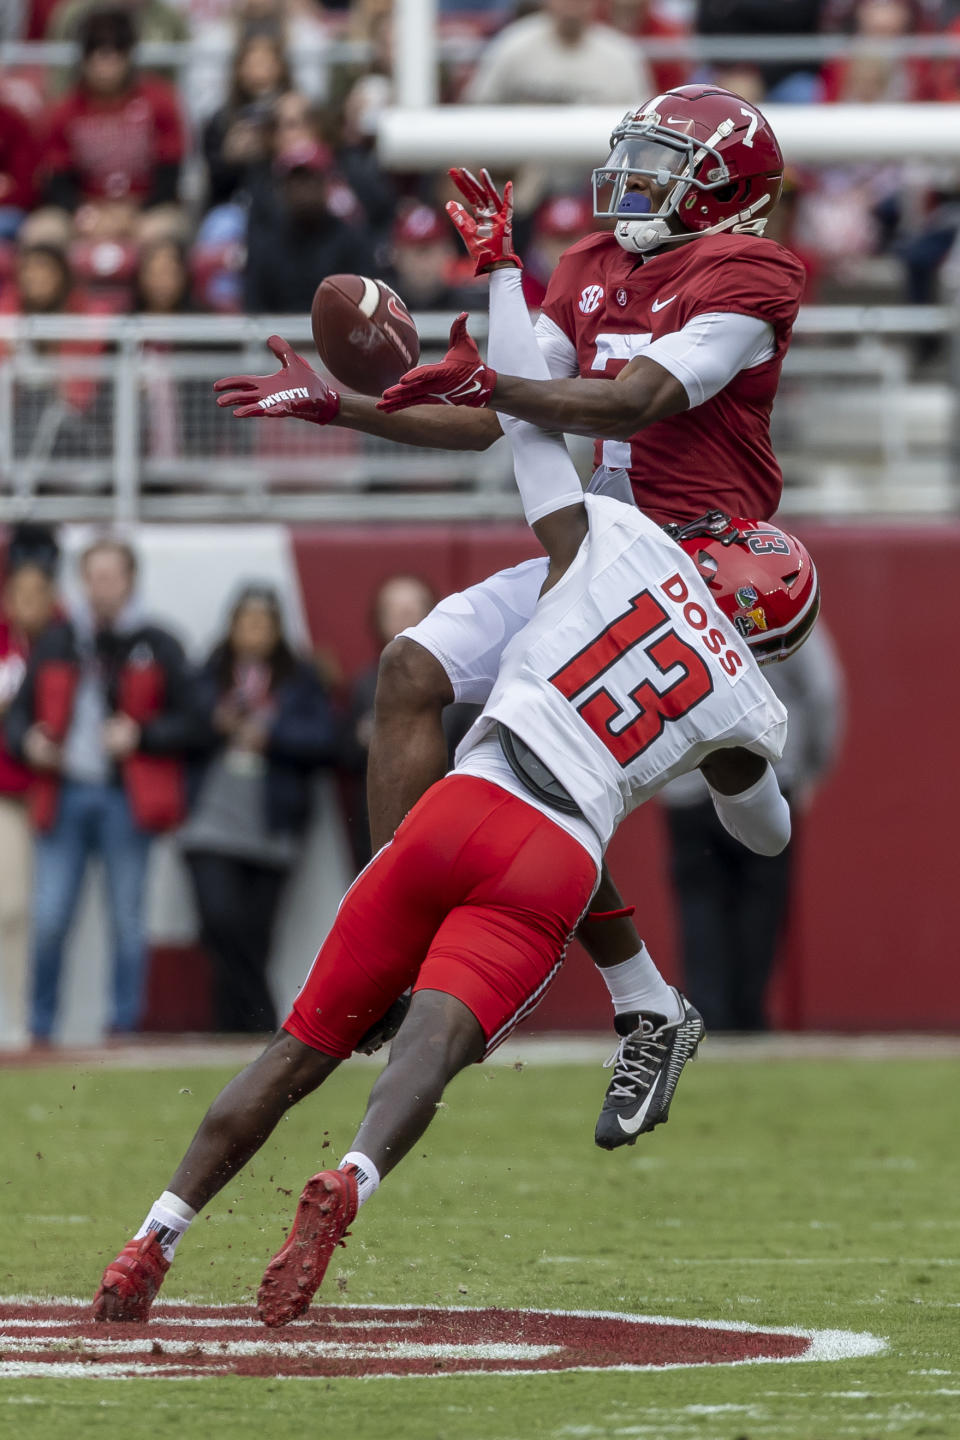 Austin Peay defensive back Cedarius Doss (13) deflects a pass meant for Alabama wide receiver Ja'Corey Brooks (7) during the first half of an NCAA college football game, Saturday, Nov. 19, 2022, in Tuscaloosa, Ala. (AP Photo/Vasha Hunt)